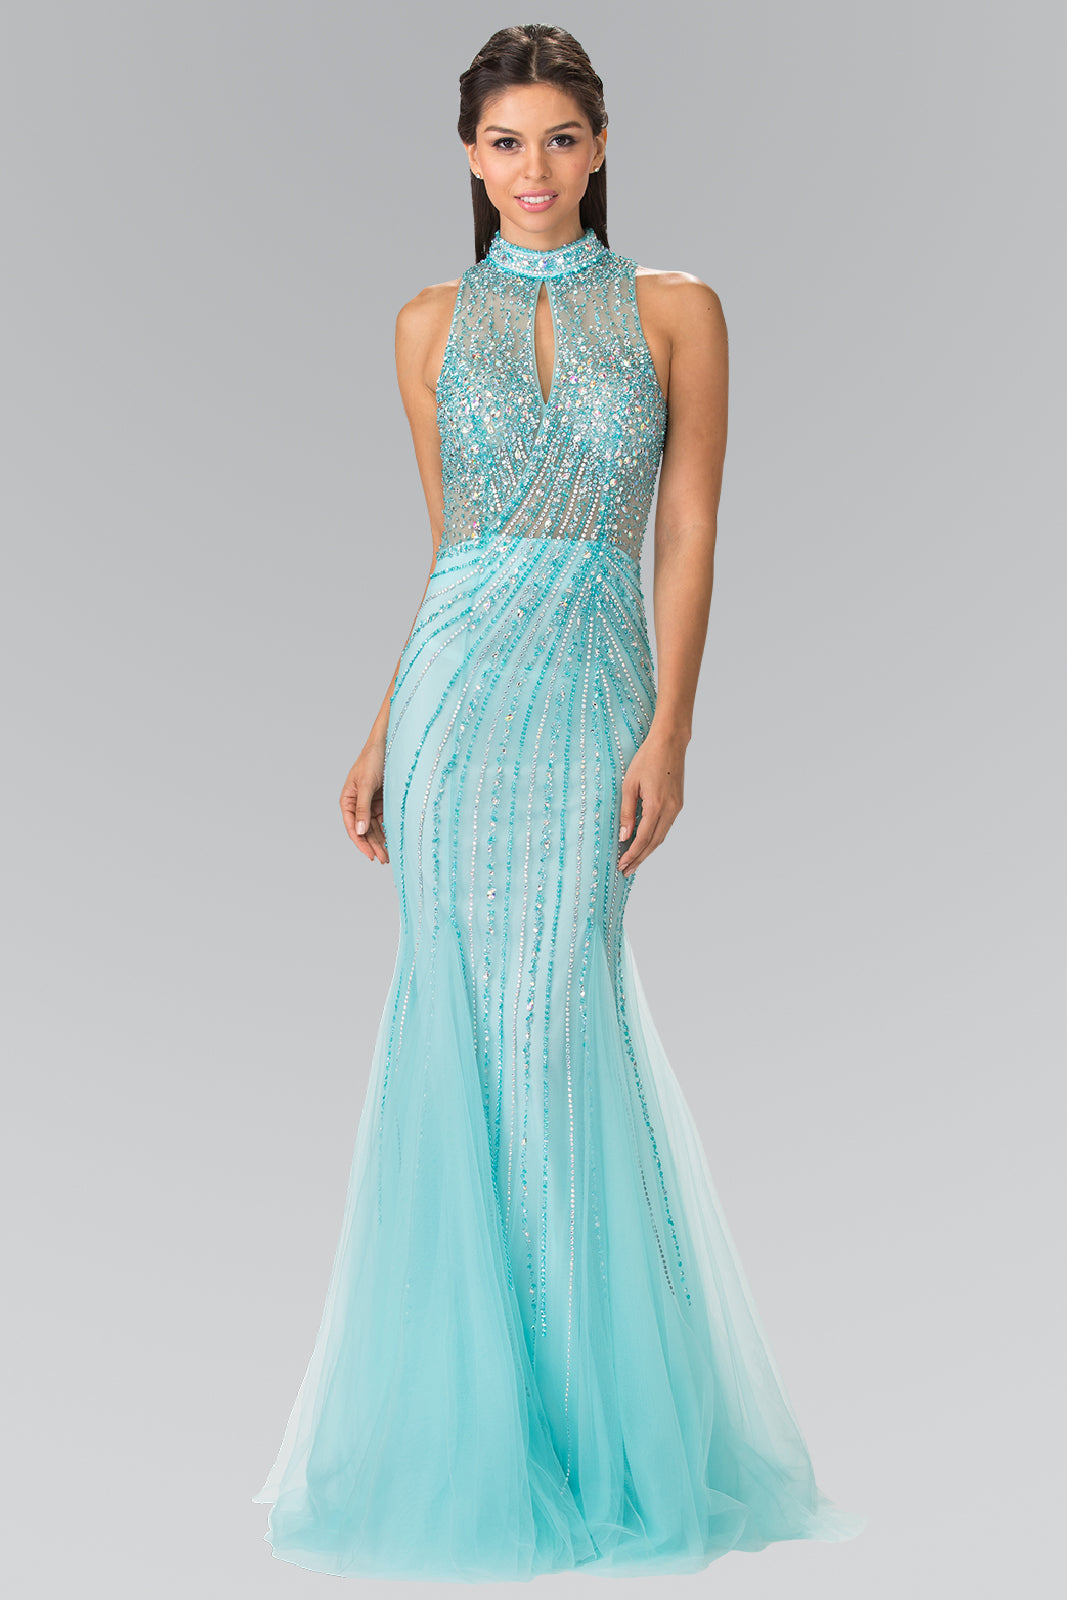 Full Beaded Halter Neck Illusion Top Dress with Open Back GLGL2330 Elsy Style PROM